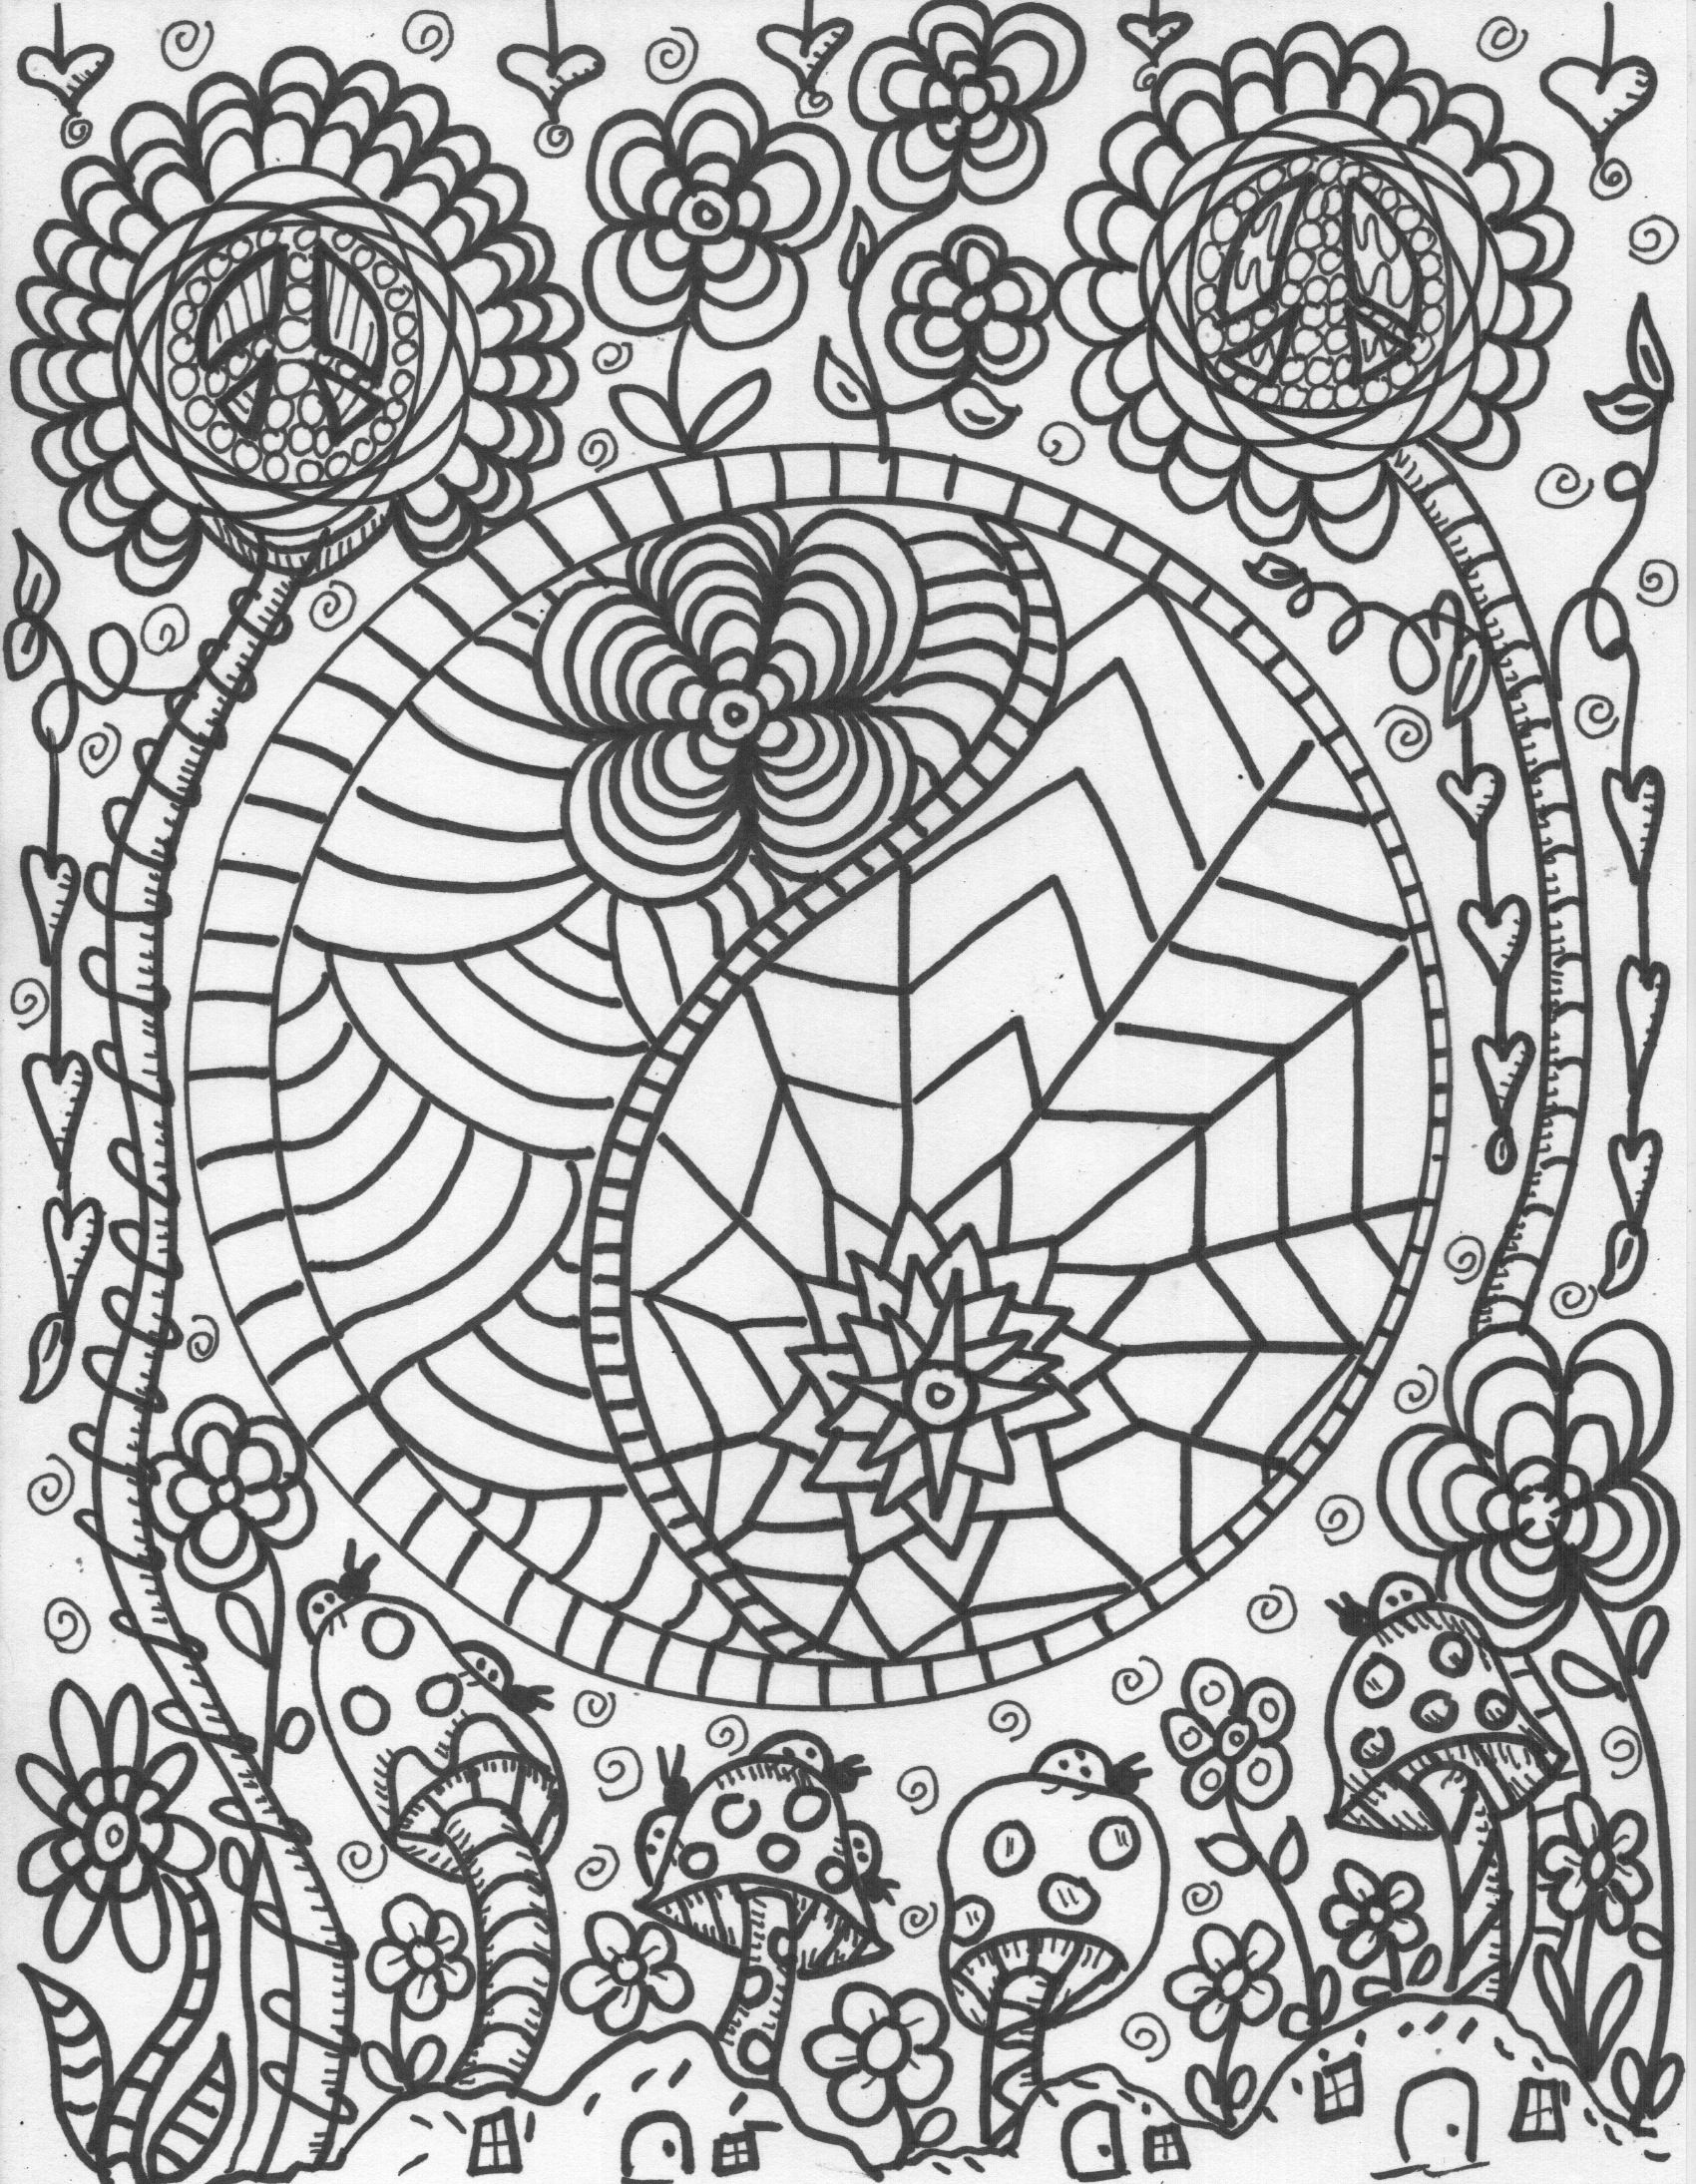 13 Pics of Flower Paisley Patterns Coloring Pages - Paisley ...